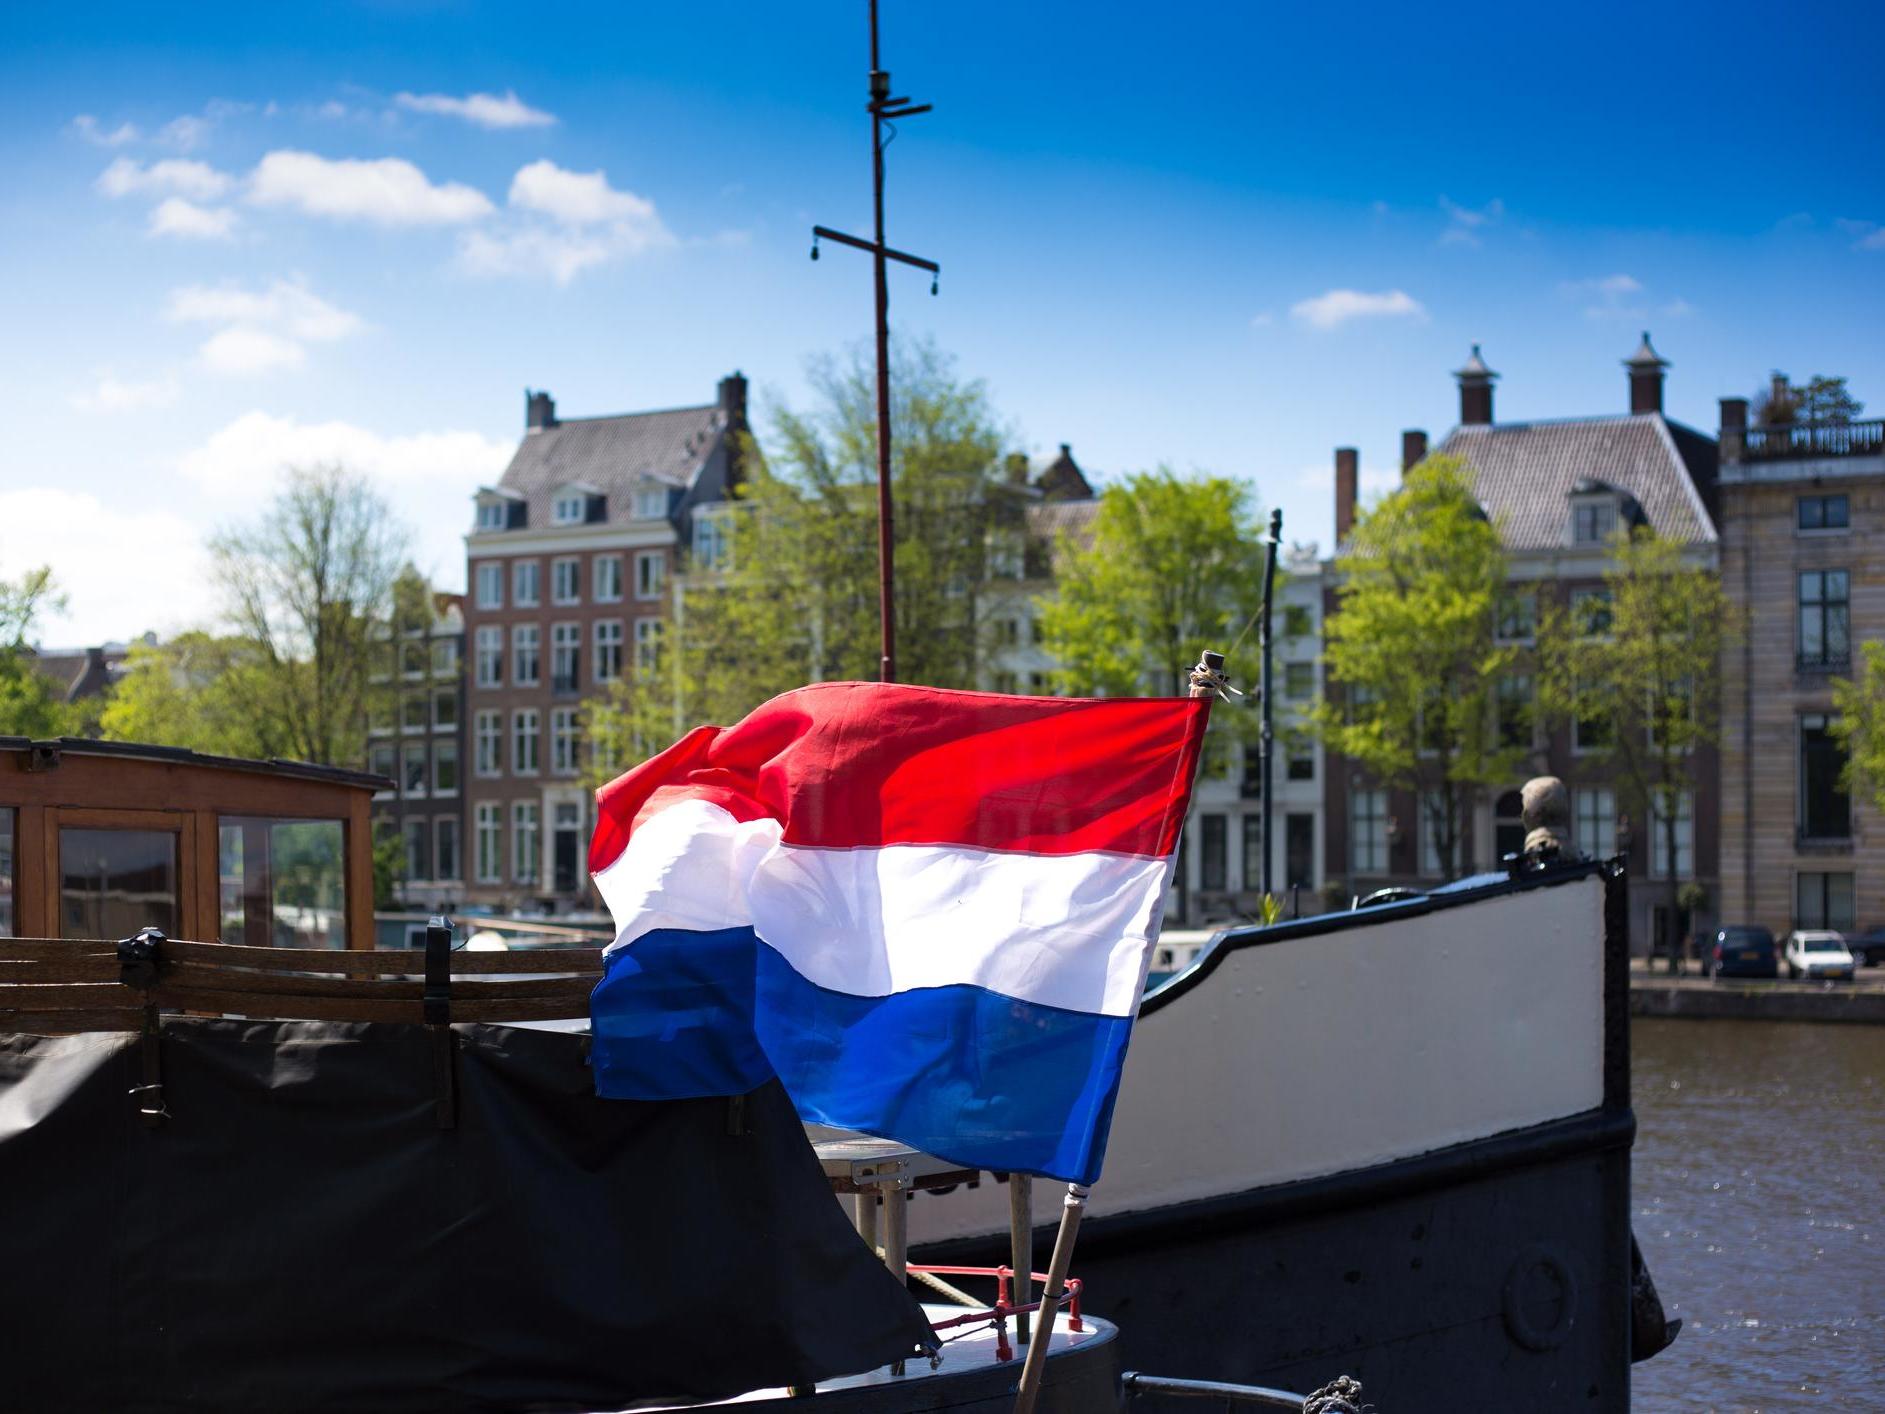 Brexit: Dutch government account tweets poll asking people if they will now boycott English products and holidays